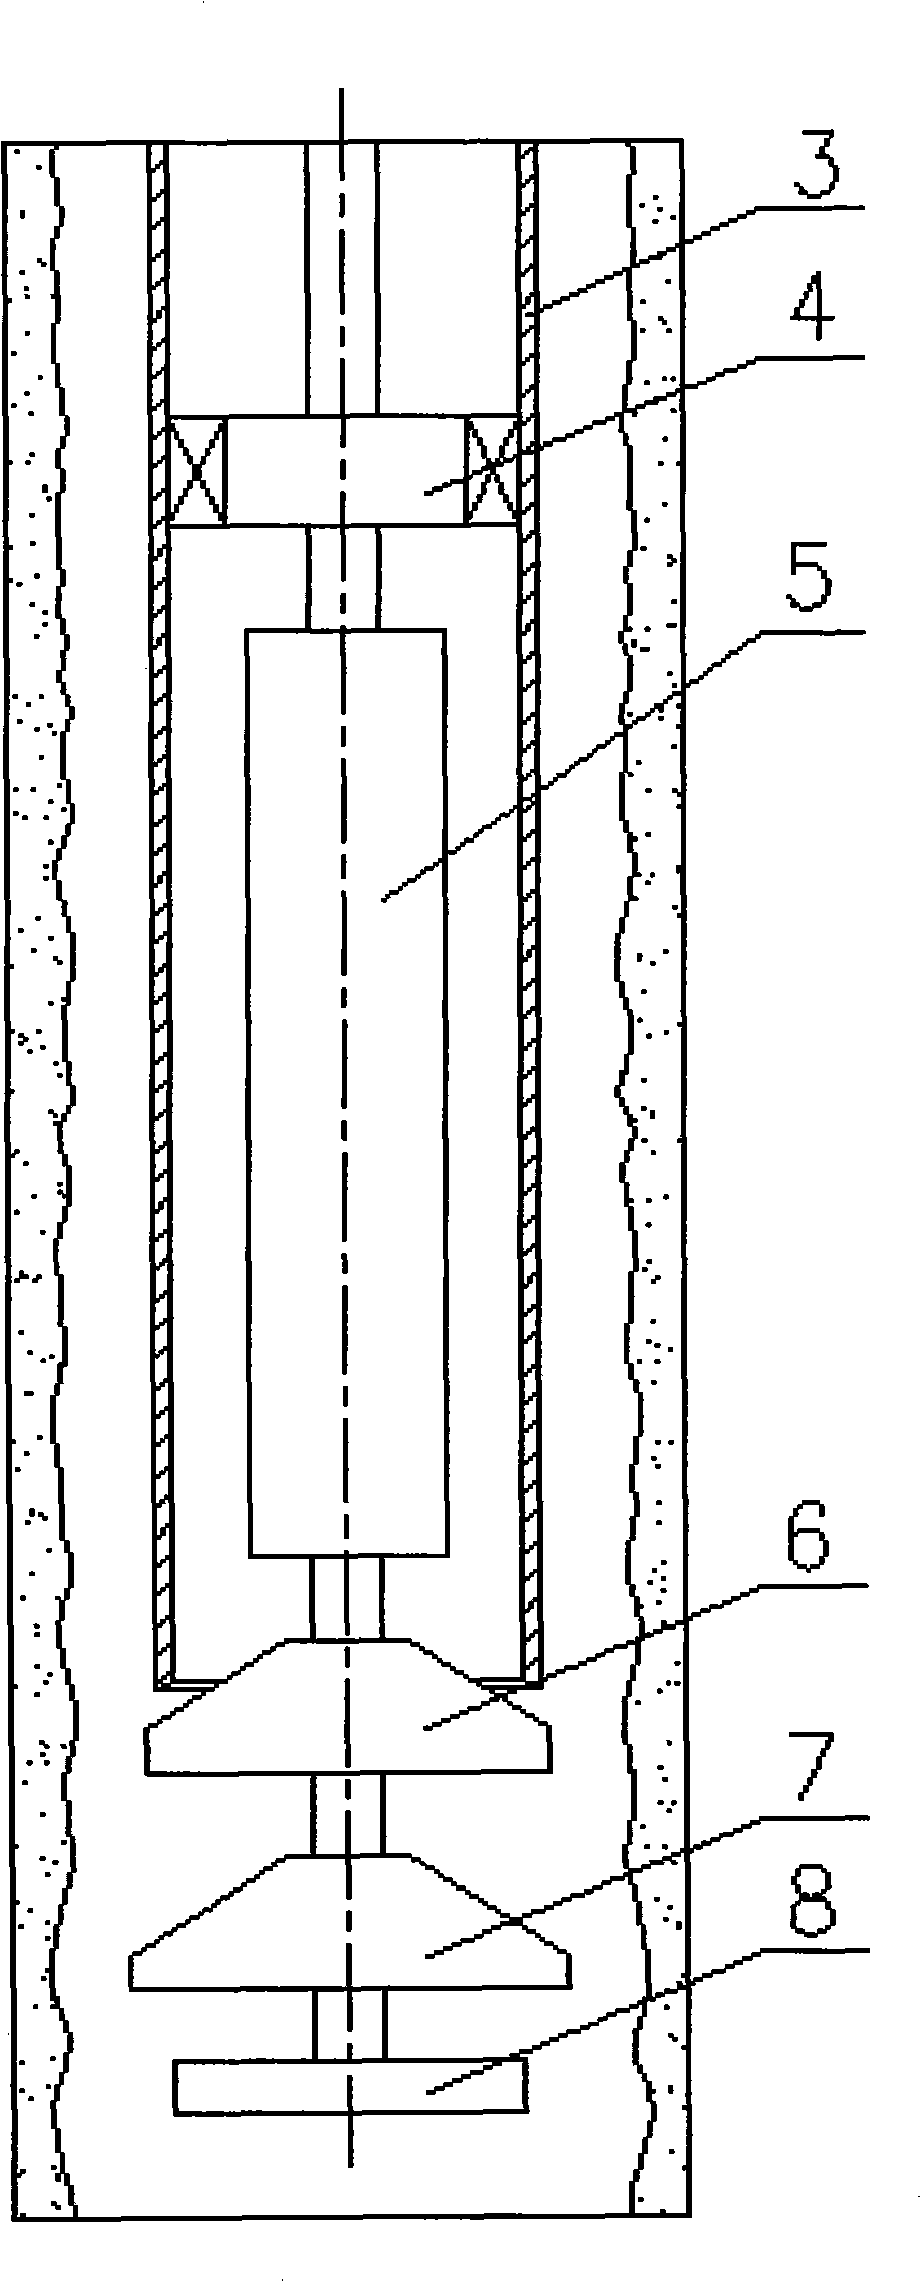 Process method for well completion at equal borehole diameter